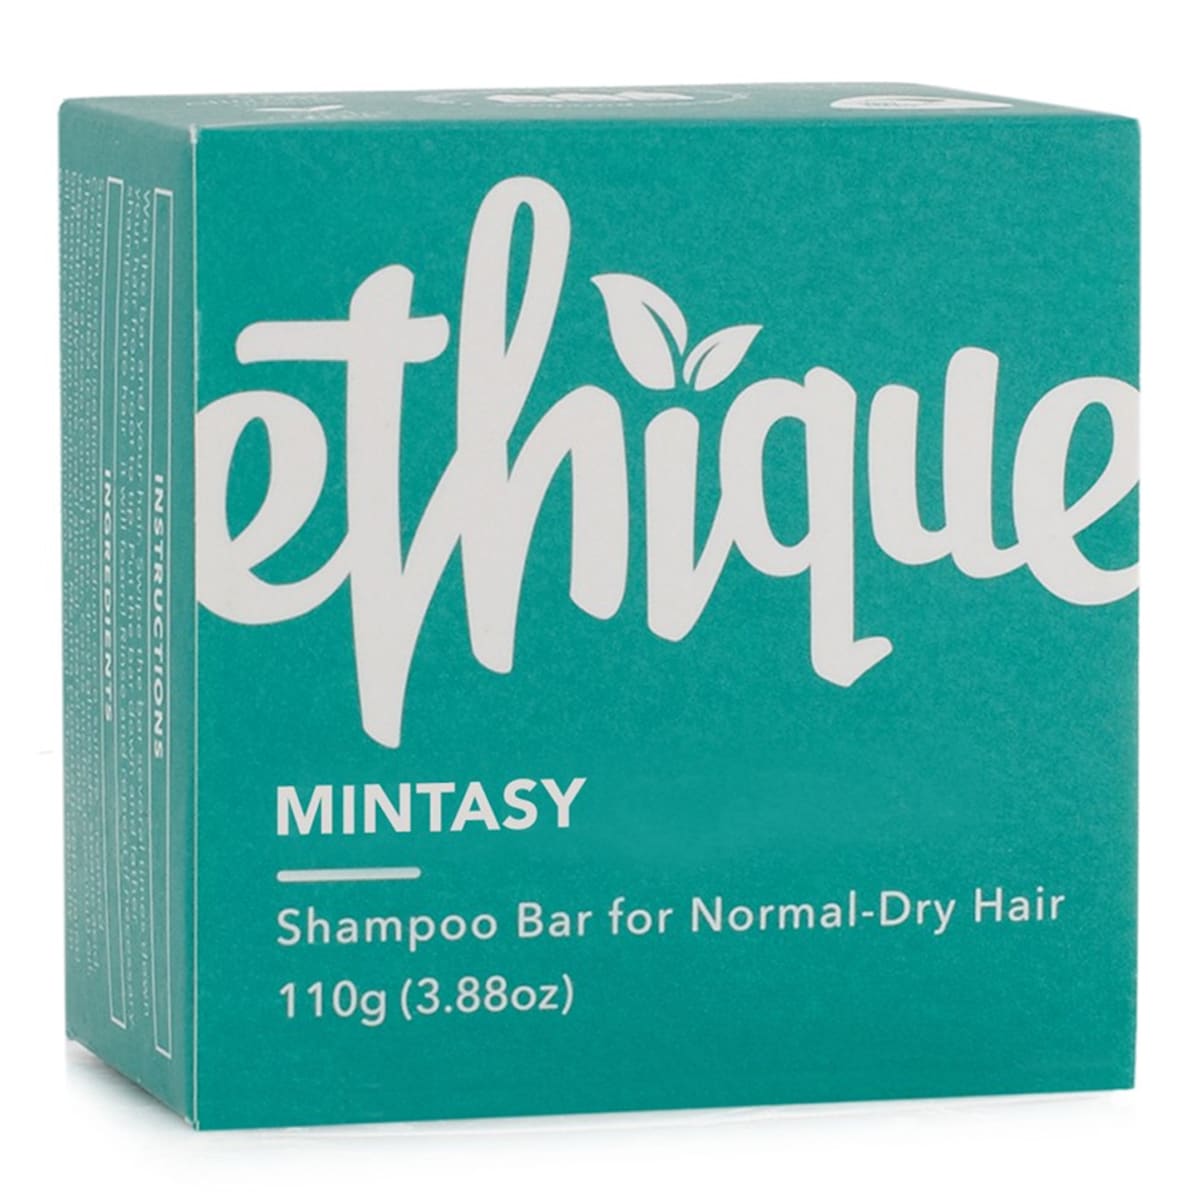 Ethique Solid Shampoo Bar Mintasy Normal To Dry Hair 110G